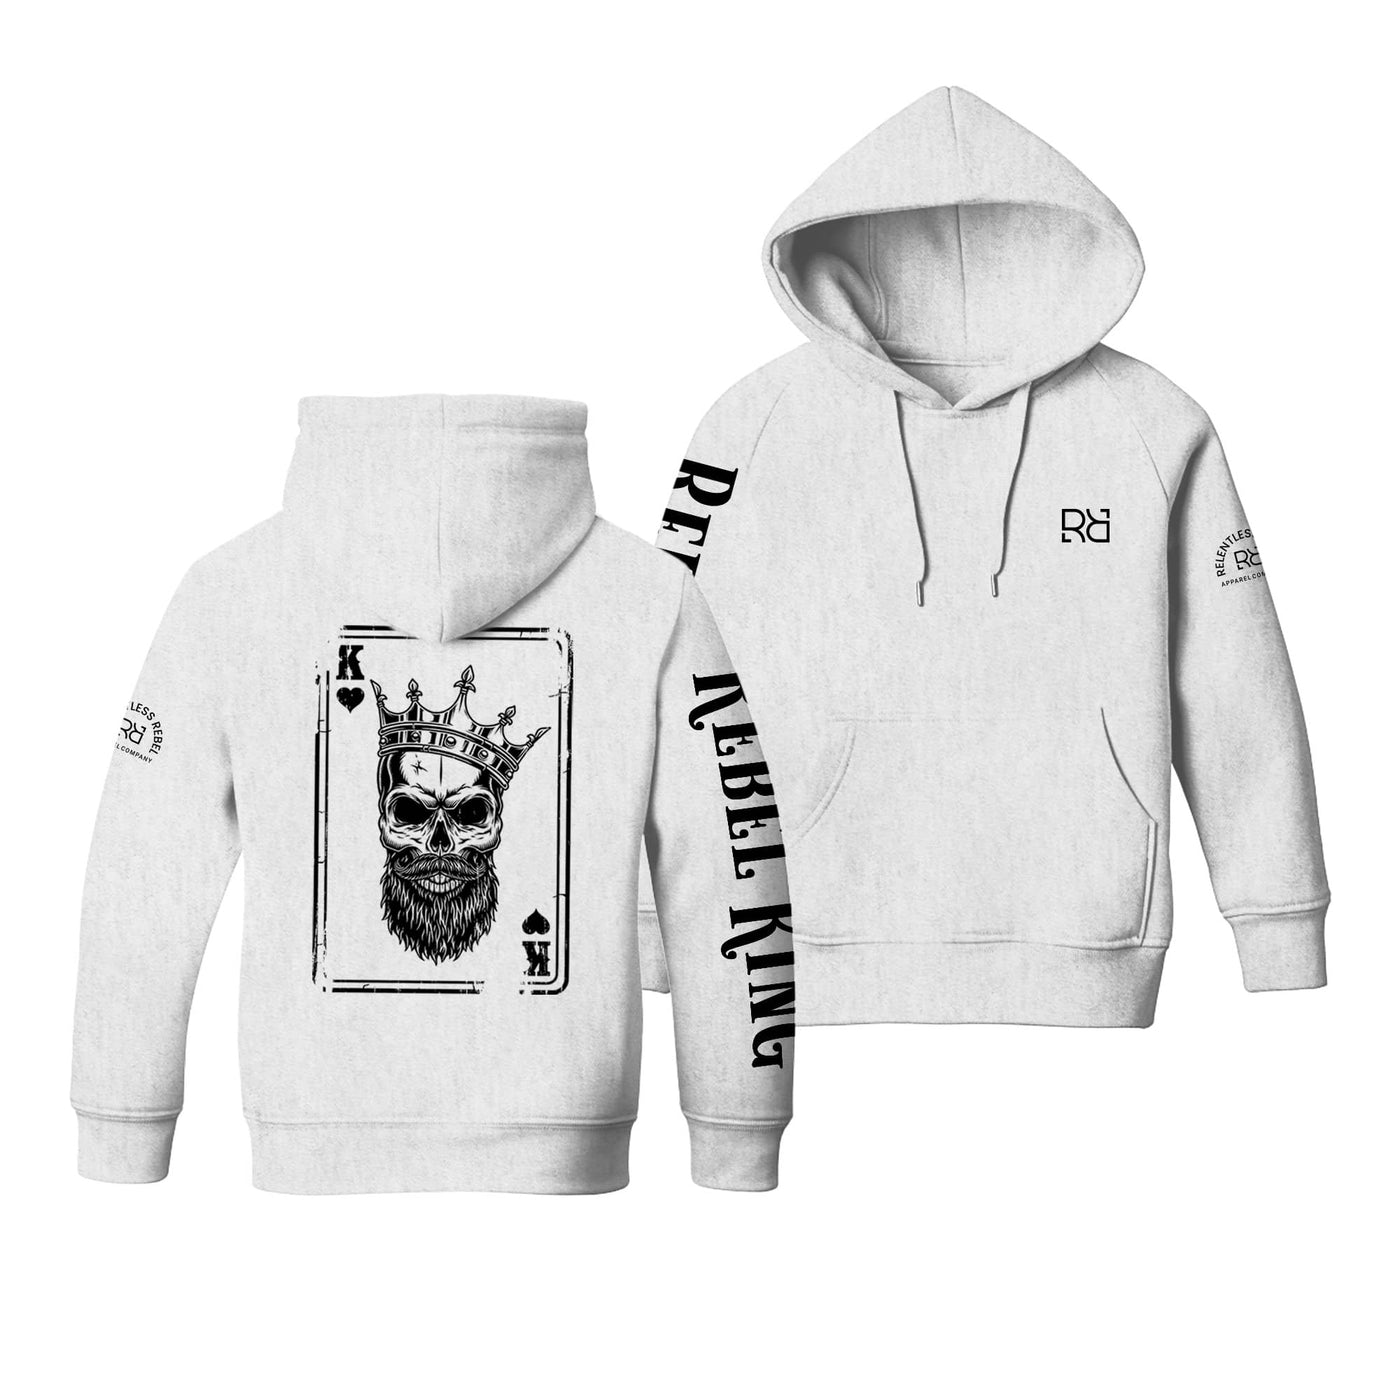 Relentless White Youth Rebel King - Ace Sleeve and Back Design Hoodie